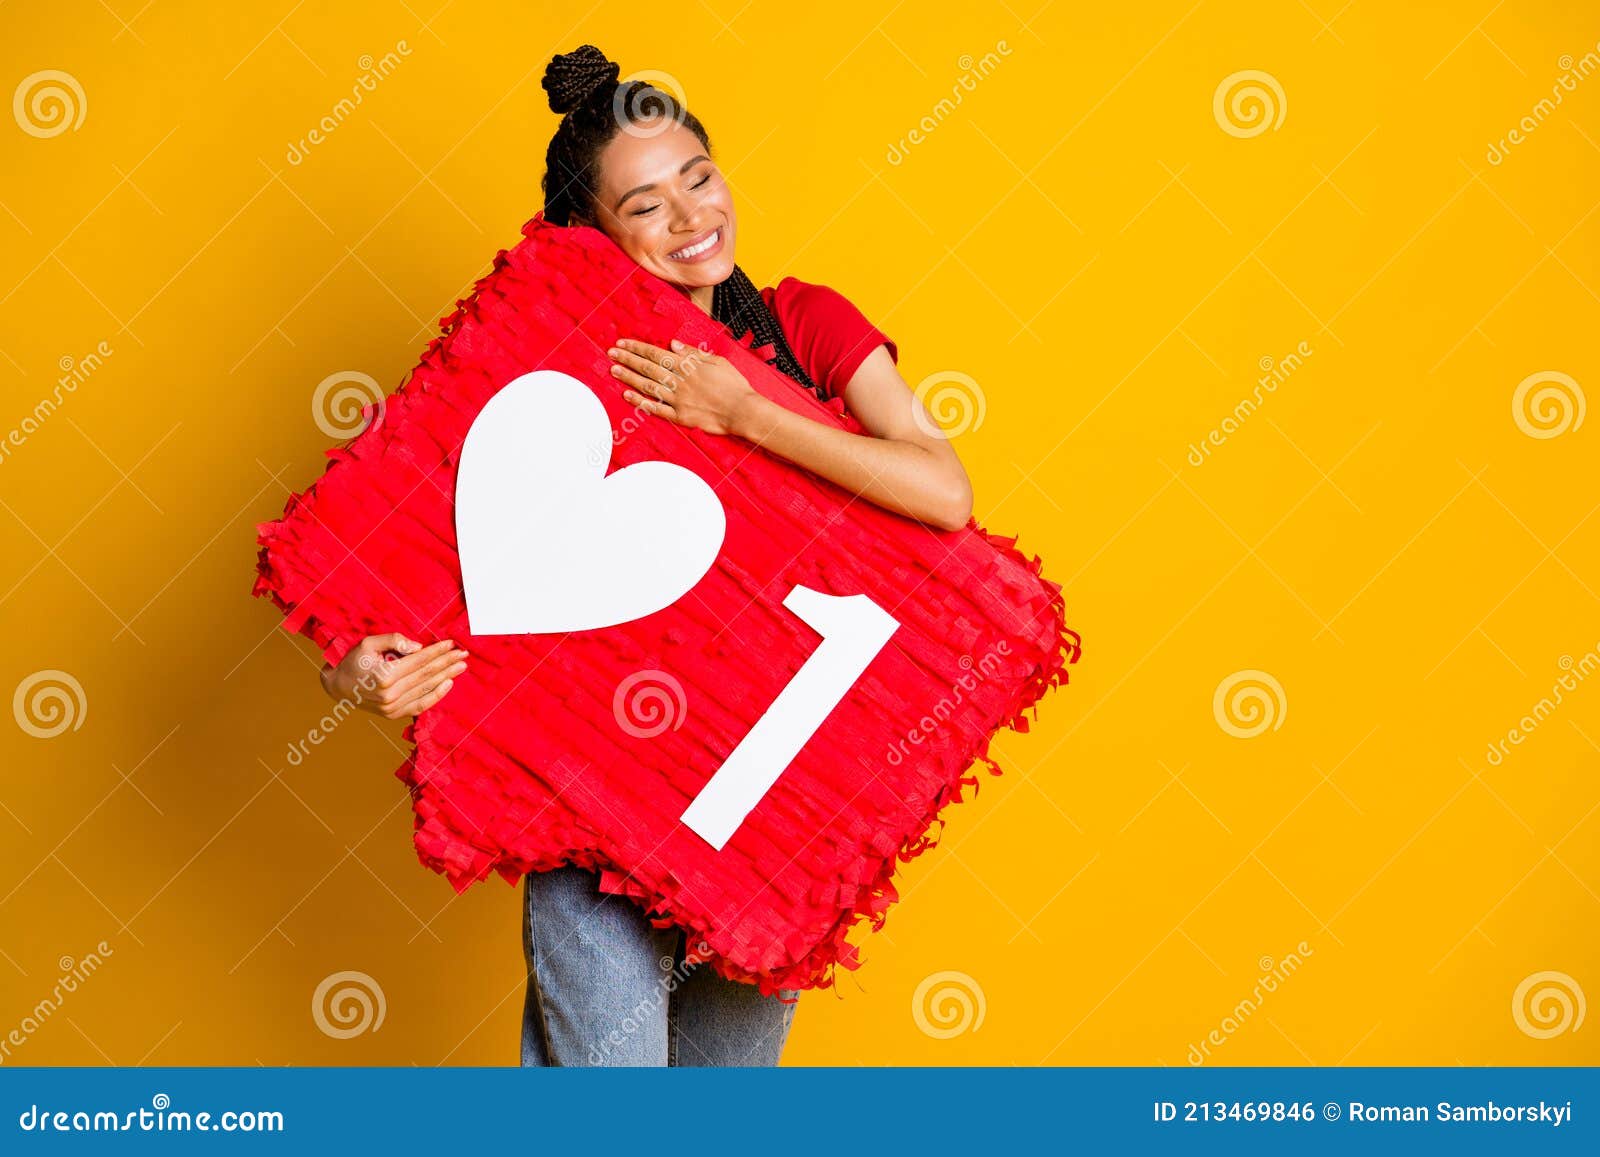 Portrait of Pretty Dreamy Cheerful Girl Holding Embracing Big Large